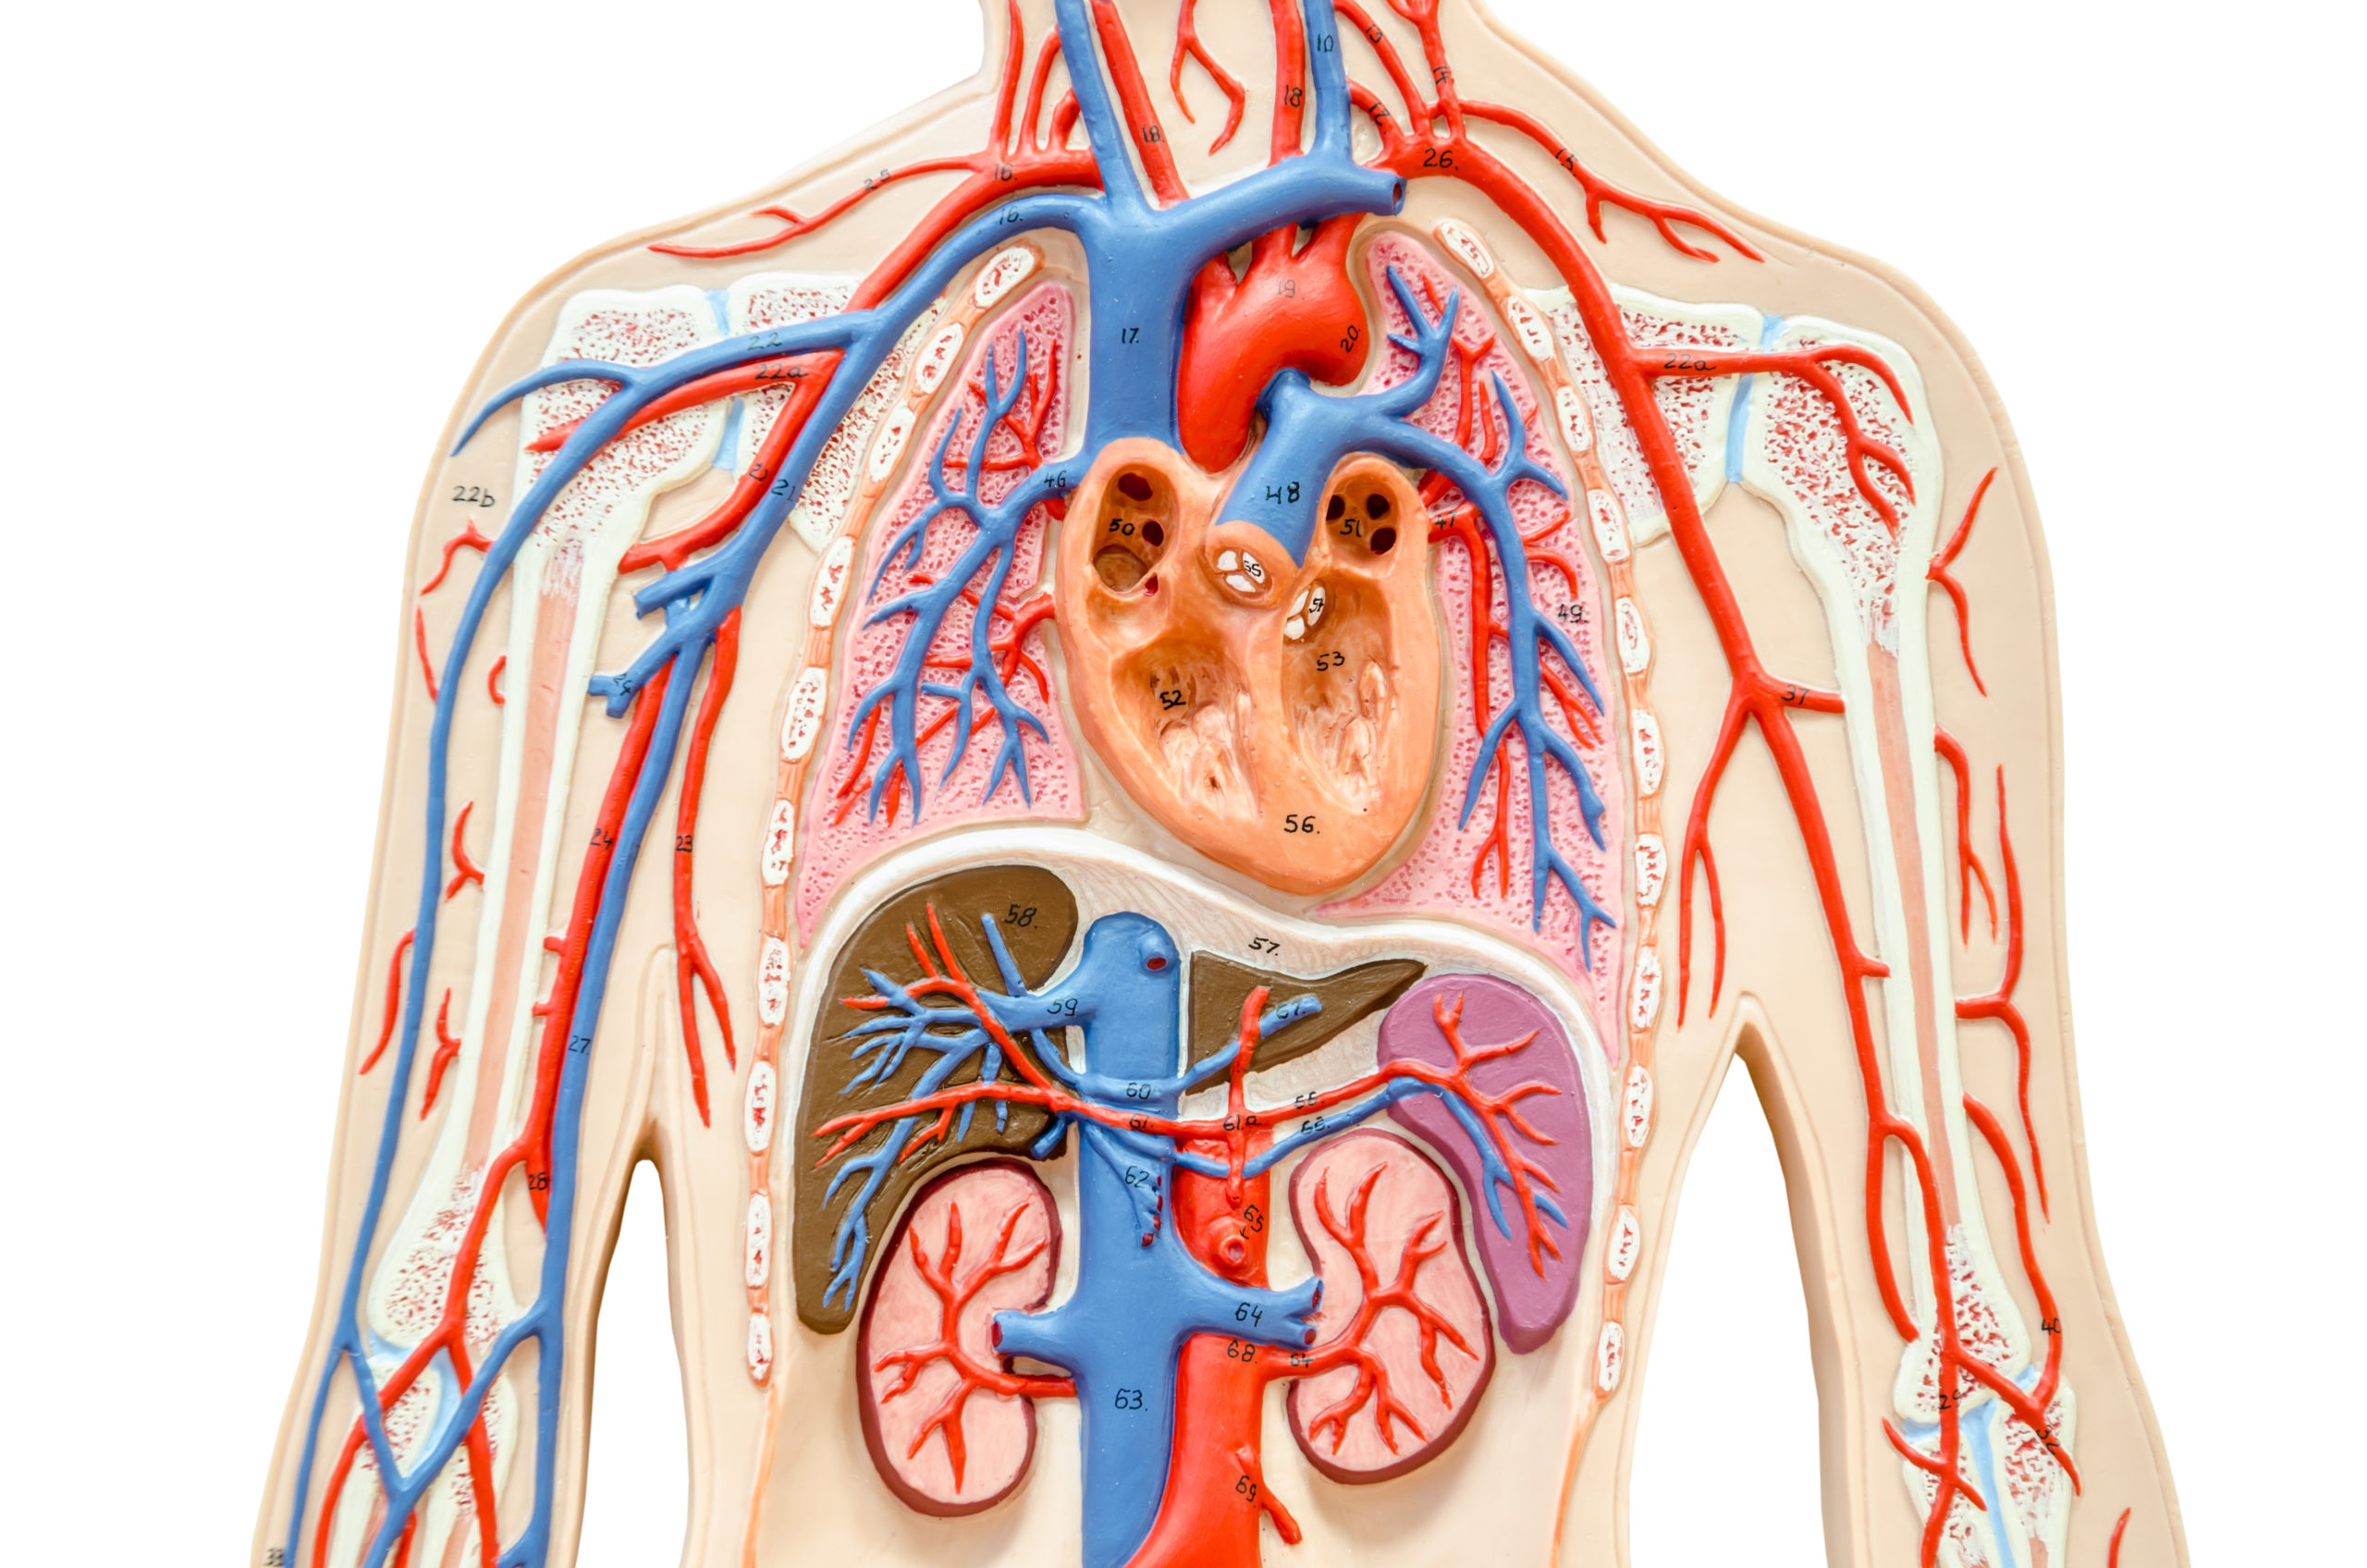 Model human body with liver, kidney, lungs and heart isolated on white background, Save clipping path.